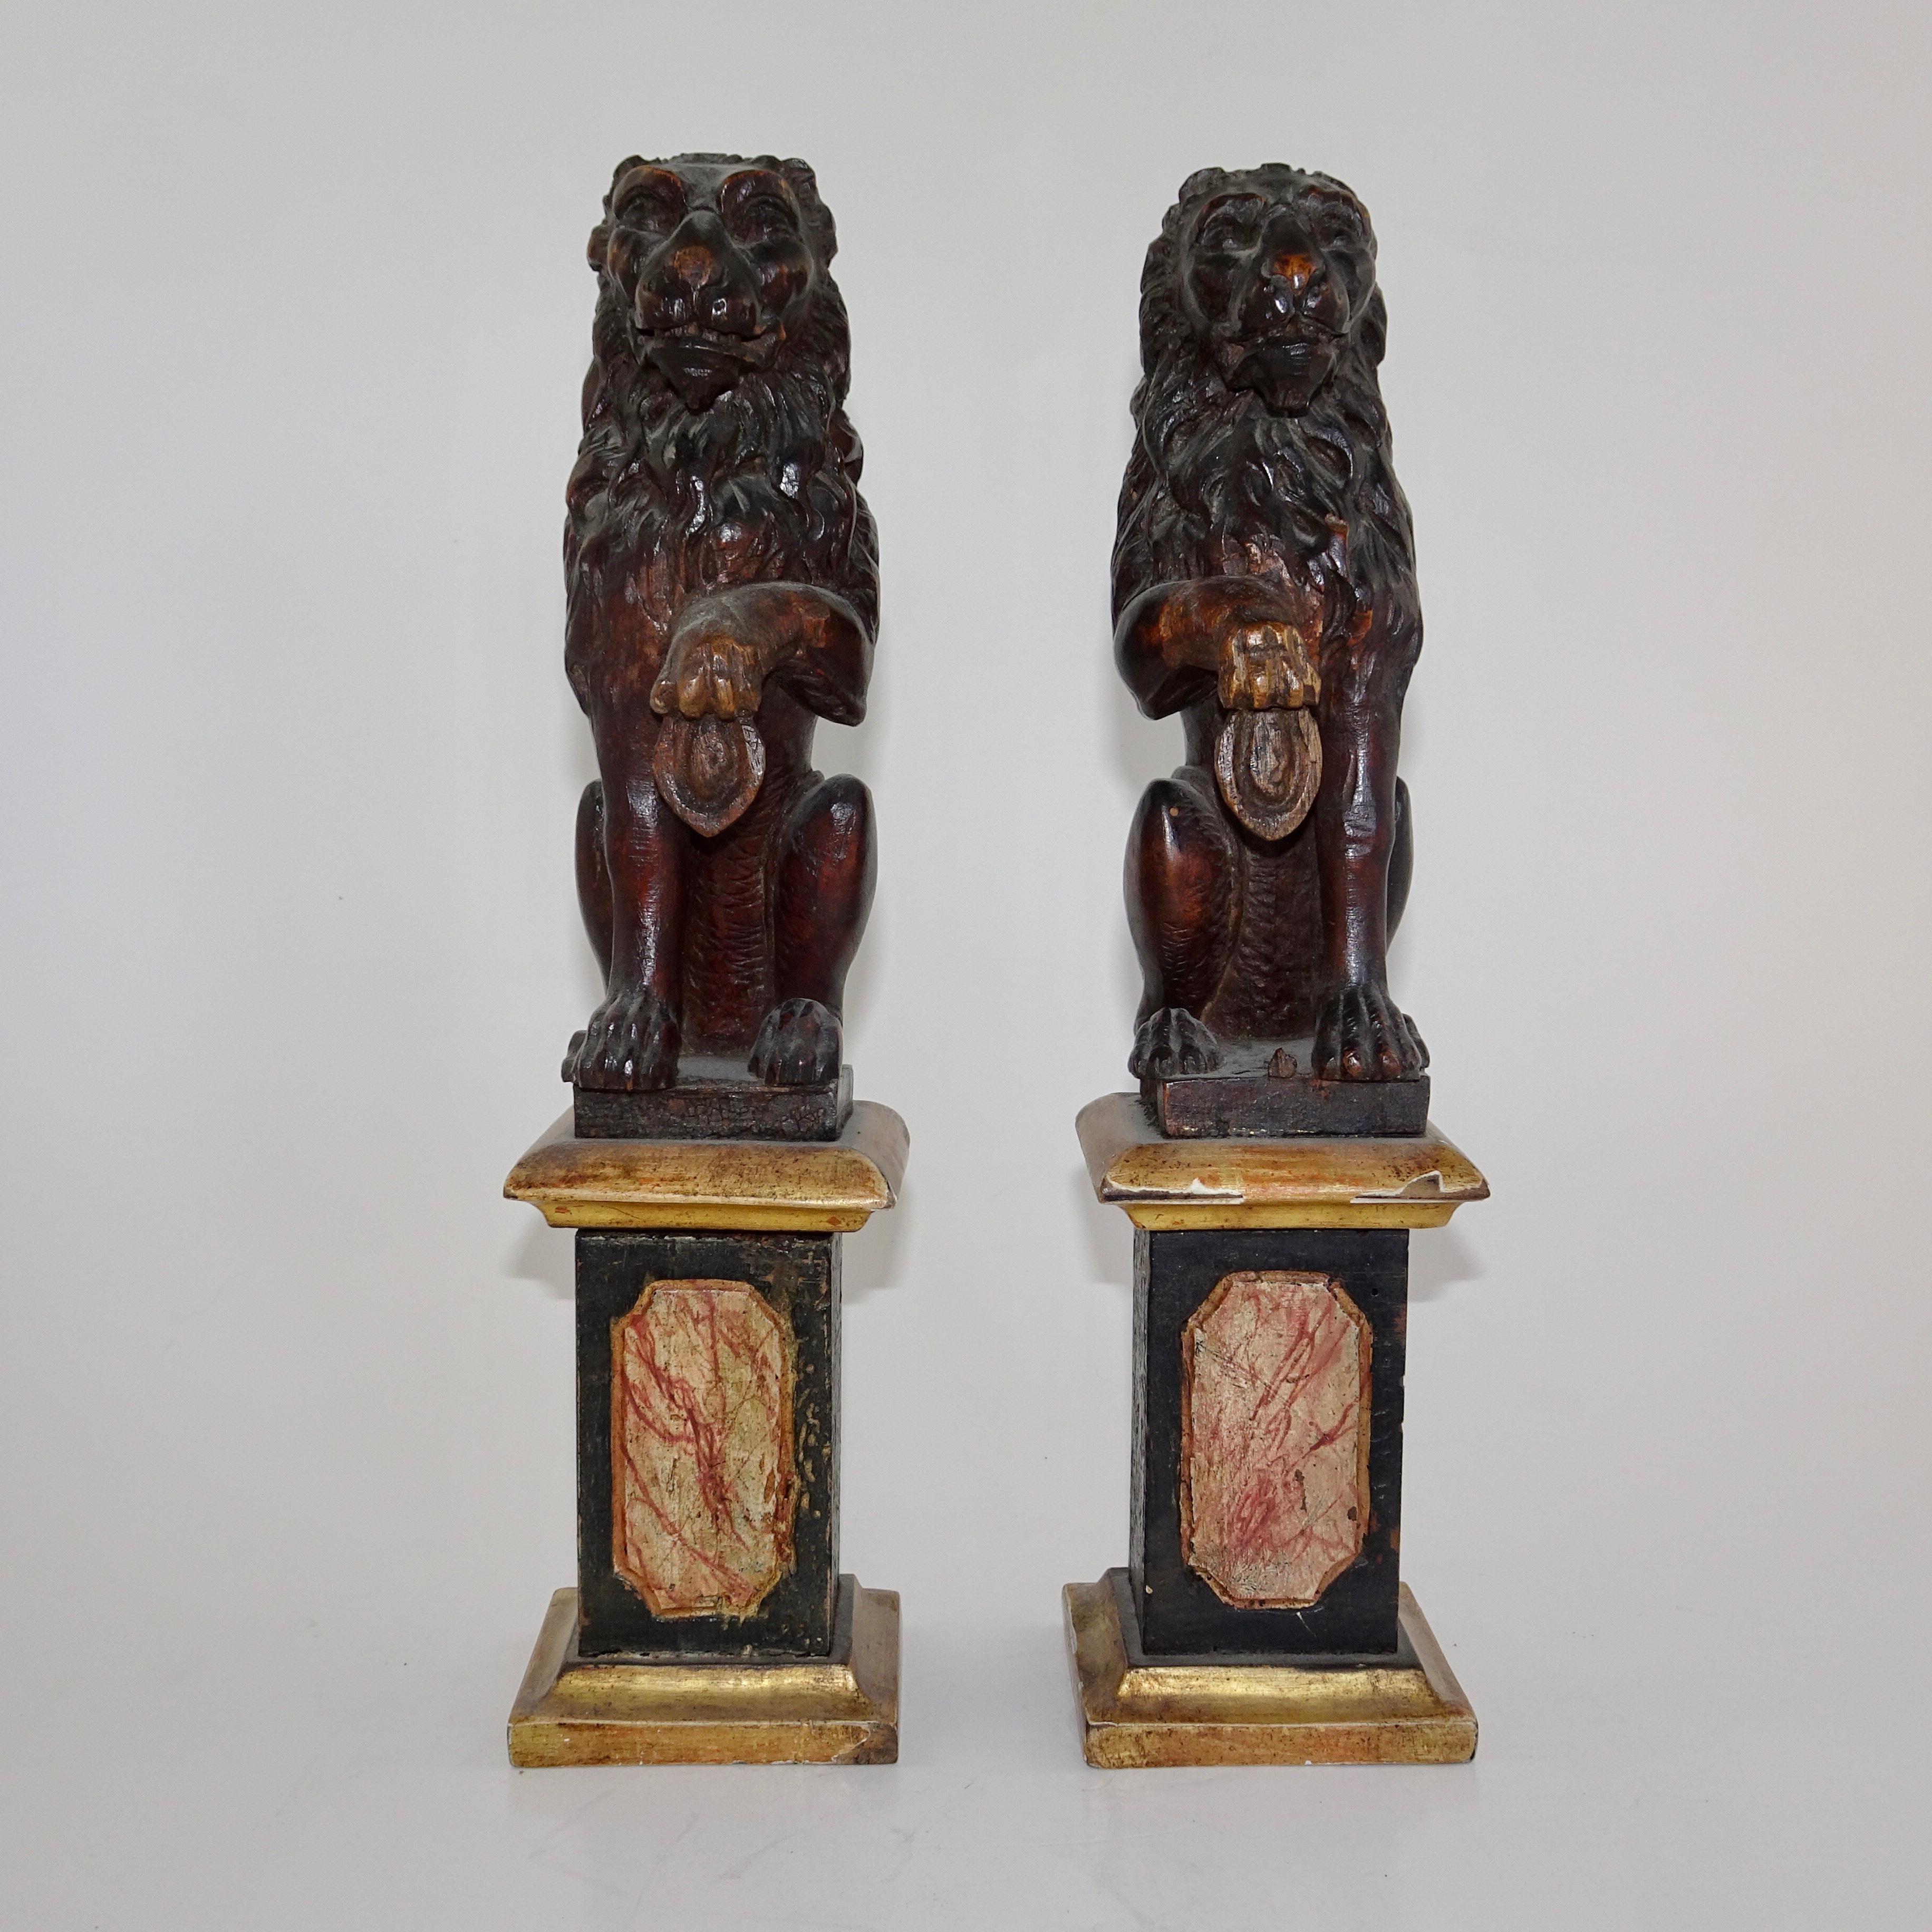 Pair of antique wood carved Lion Statues on Faux marble bases. The lions are depicted sitting on their hind legs with one paw lifted. The marble base is in shades of gold, red, and black.